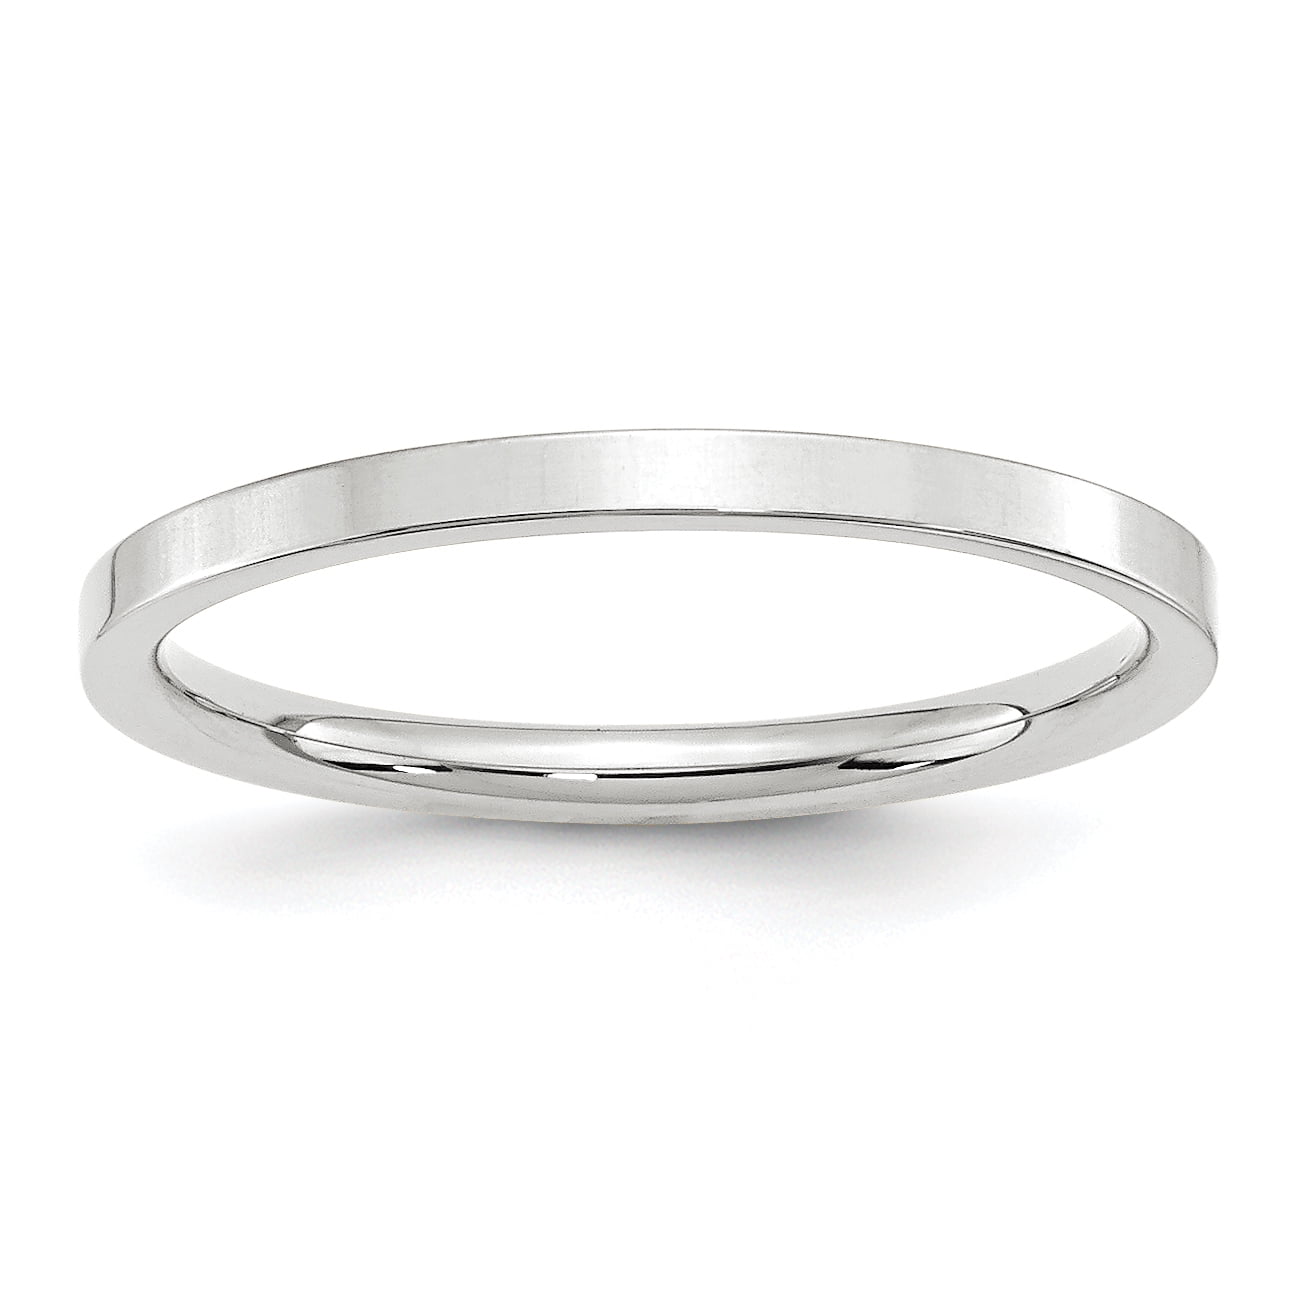 Solid 10k White Gold 2 mm Comfort Fit Flat Wedding Band Ring